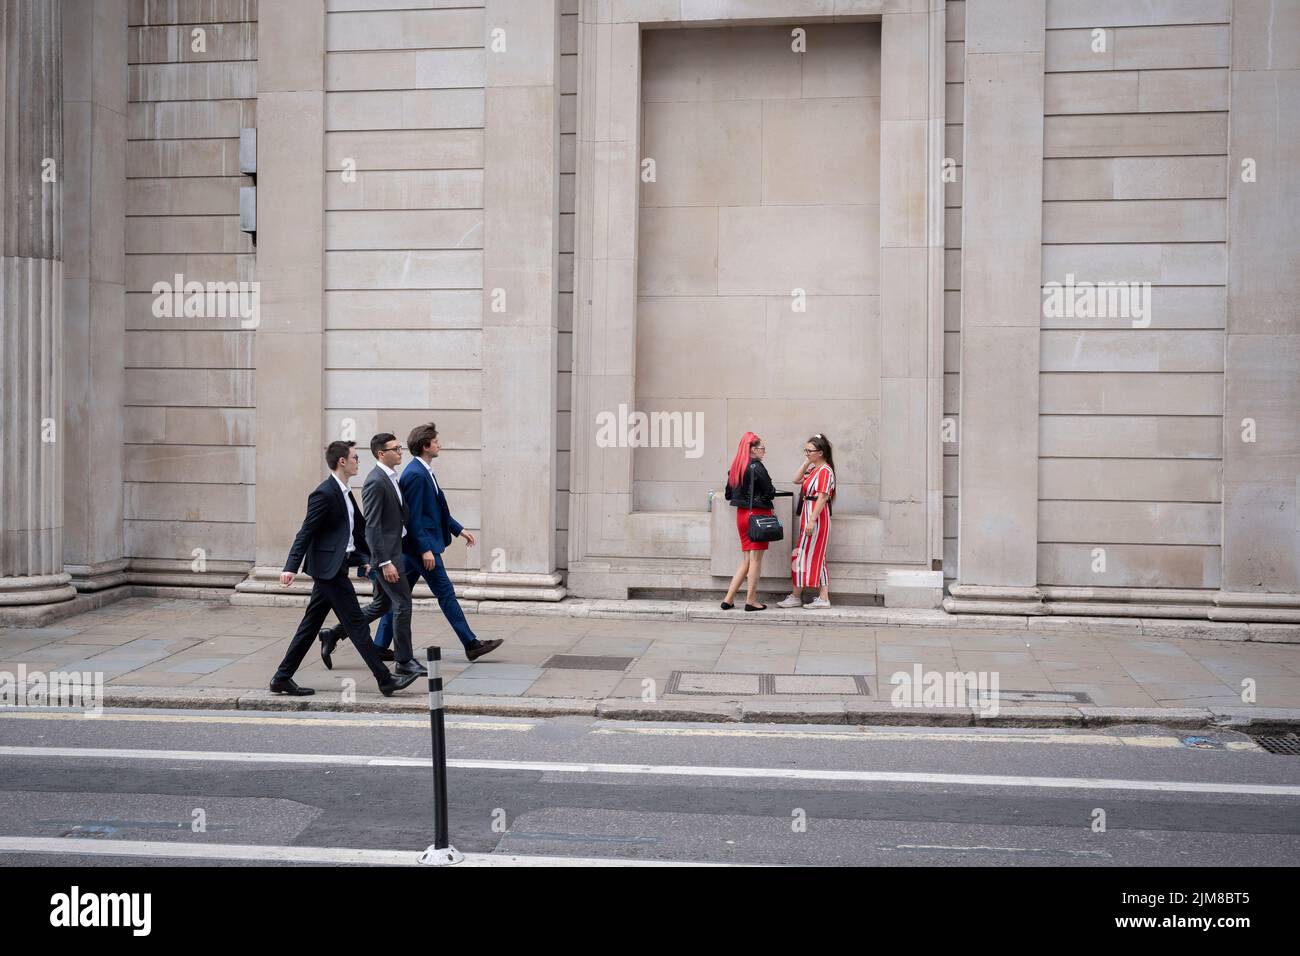 On the day that the Bank of England announced a rise, from 1.25% to 1.75% in the interest rate, the highest increase in 27 years, Londoners walk beneath the tall walls of the Bank of England, on 4th August 2022, in the City of London, England. This increase is widely seen as a slide towards inflation with a shrinking of the UK economy - the start of its fall into recession in the third financial quarter of 2022. Stock Photo